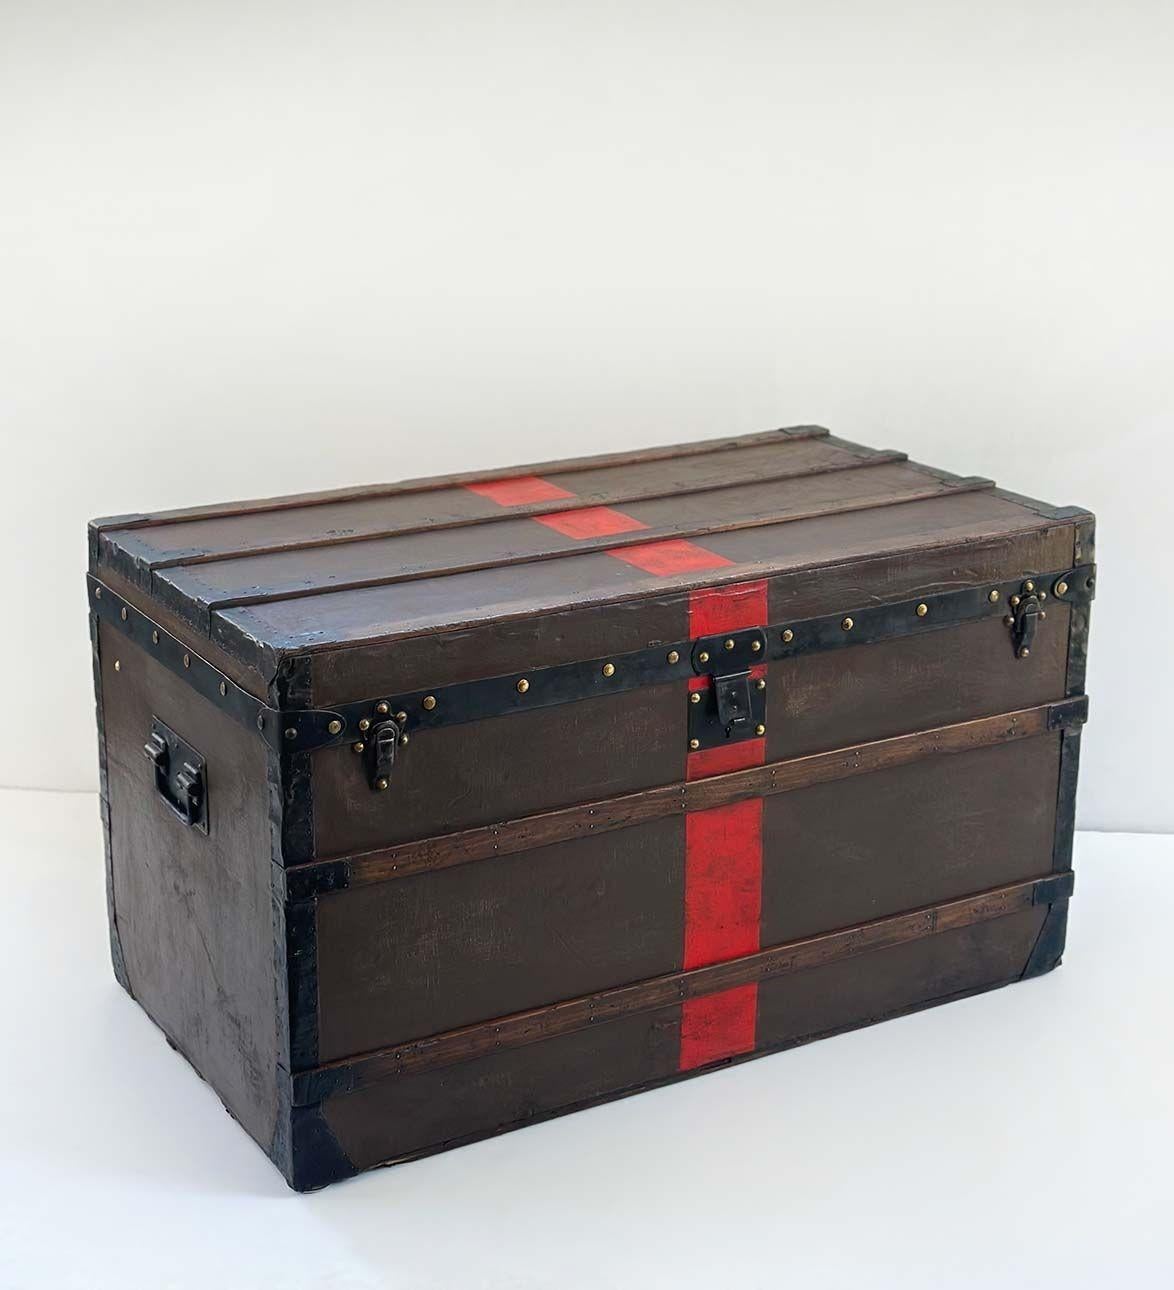 Rare Louis Vuitton steamer trunk with its original interior sticker showcasing its provenance and serial number. Adorned with sleek black  metal trim and hardware which includes 